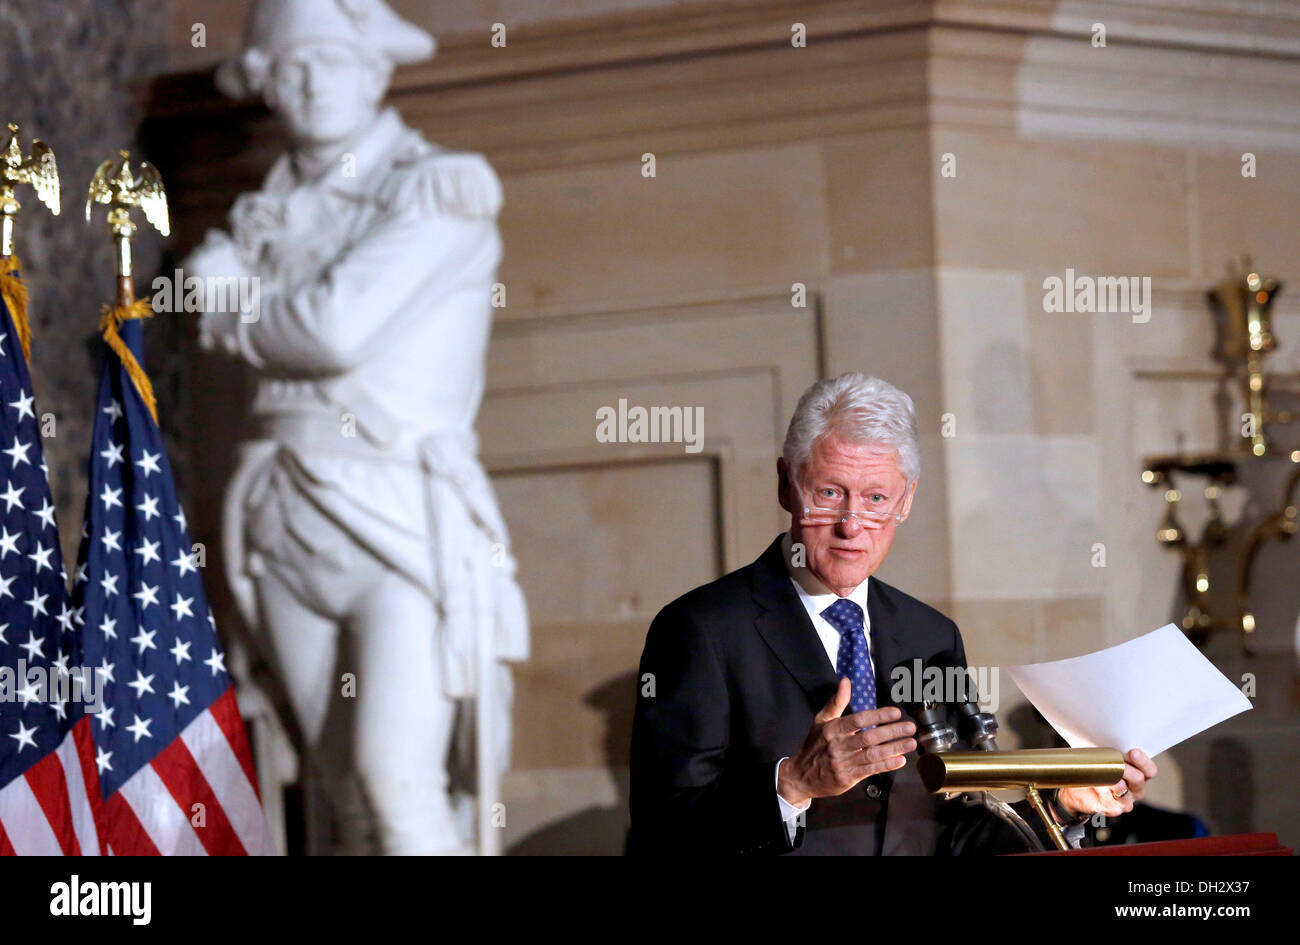 Former United States President Bill Clinton delivers a tribute during a memorial service honoring former Speaker of the U.S. House Thomas S. Foley (Democrat of Washington) in the U.S. Capitol in Washington, DC on October 29, 2013. Foley represented Washington's 5th Congressional District was the 57th Speaker of the US House of Representatives from 1989 to 1995. He later served as US Ambassador to Japan from 1997 to 2001. Credit: Aude Guerrucci / Pool via CNP Stock Photo